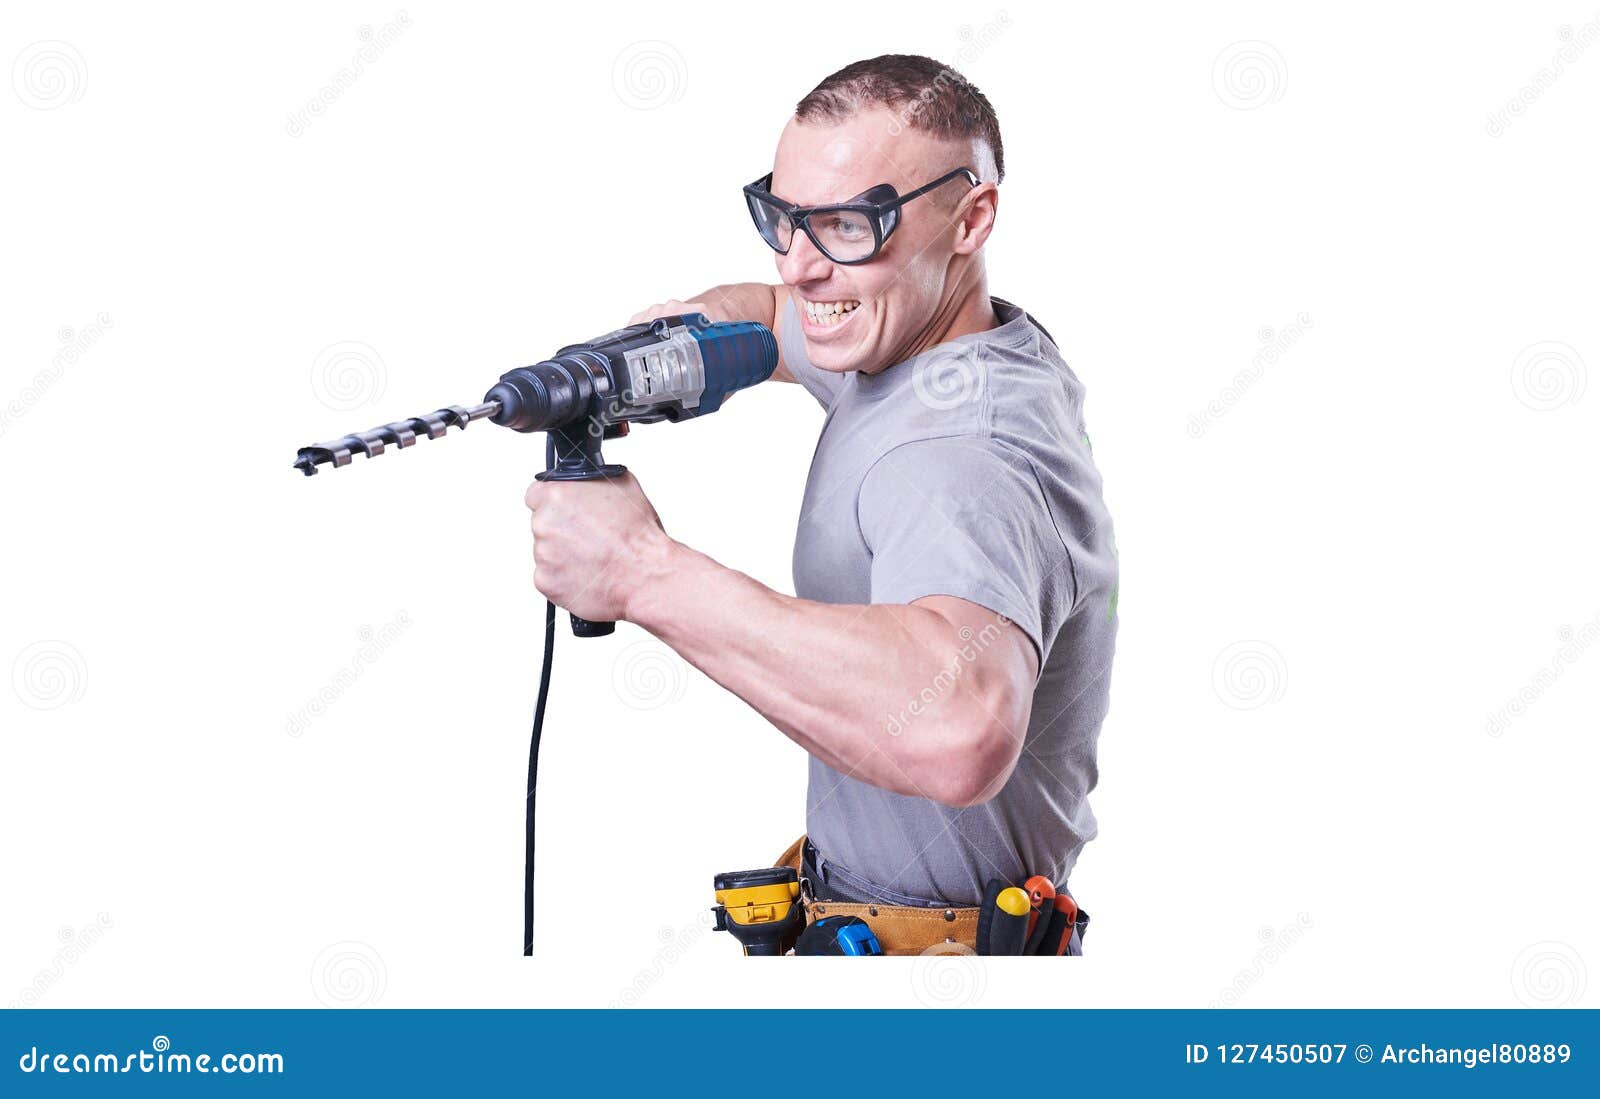 Man, Builder, Glasses, with a Drill in Hand Isolated on White ...